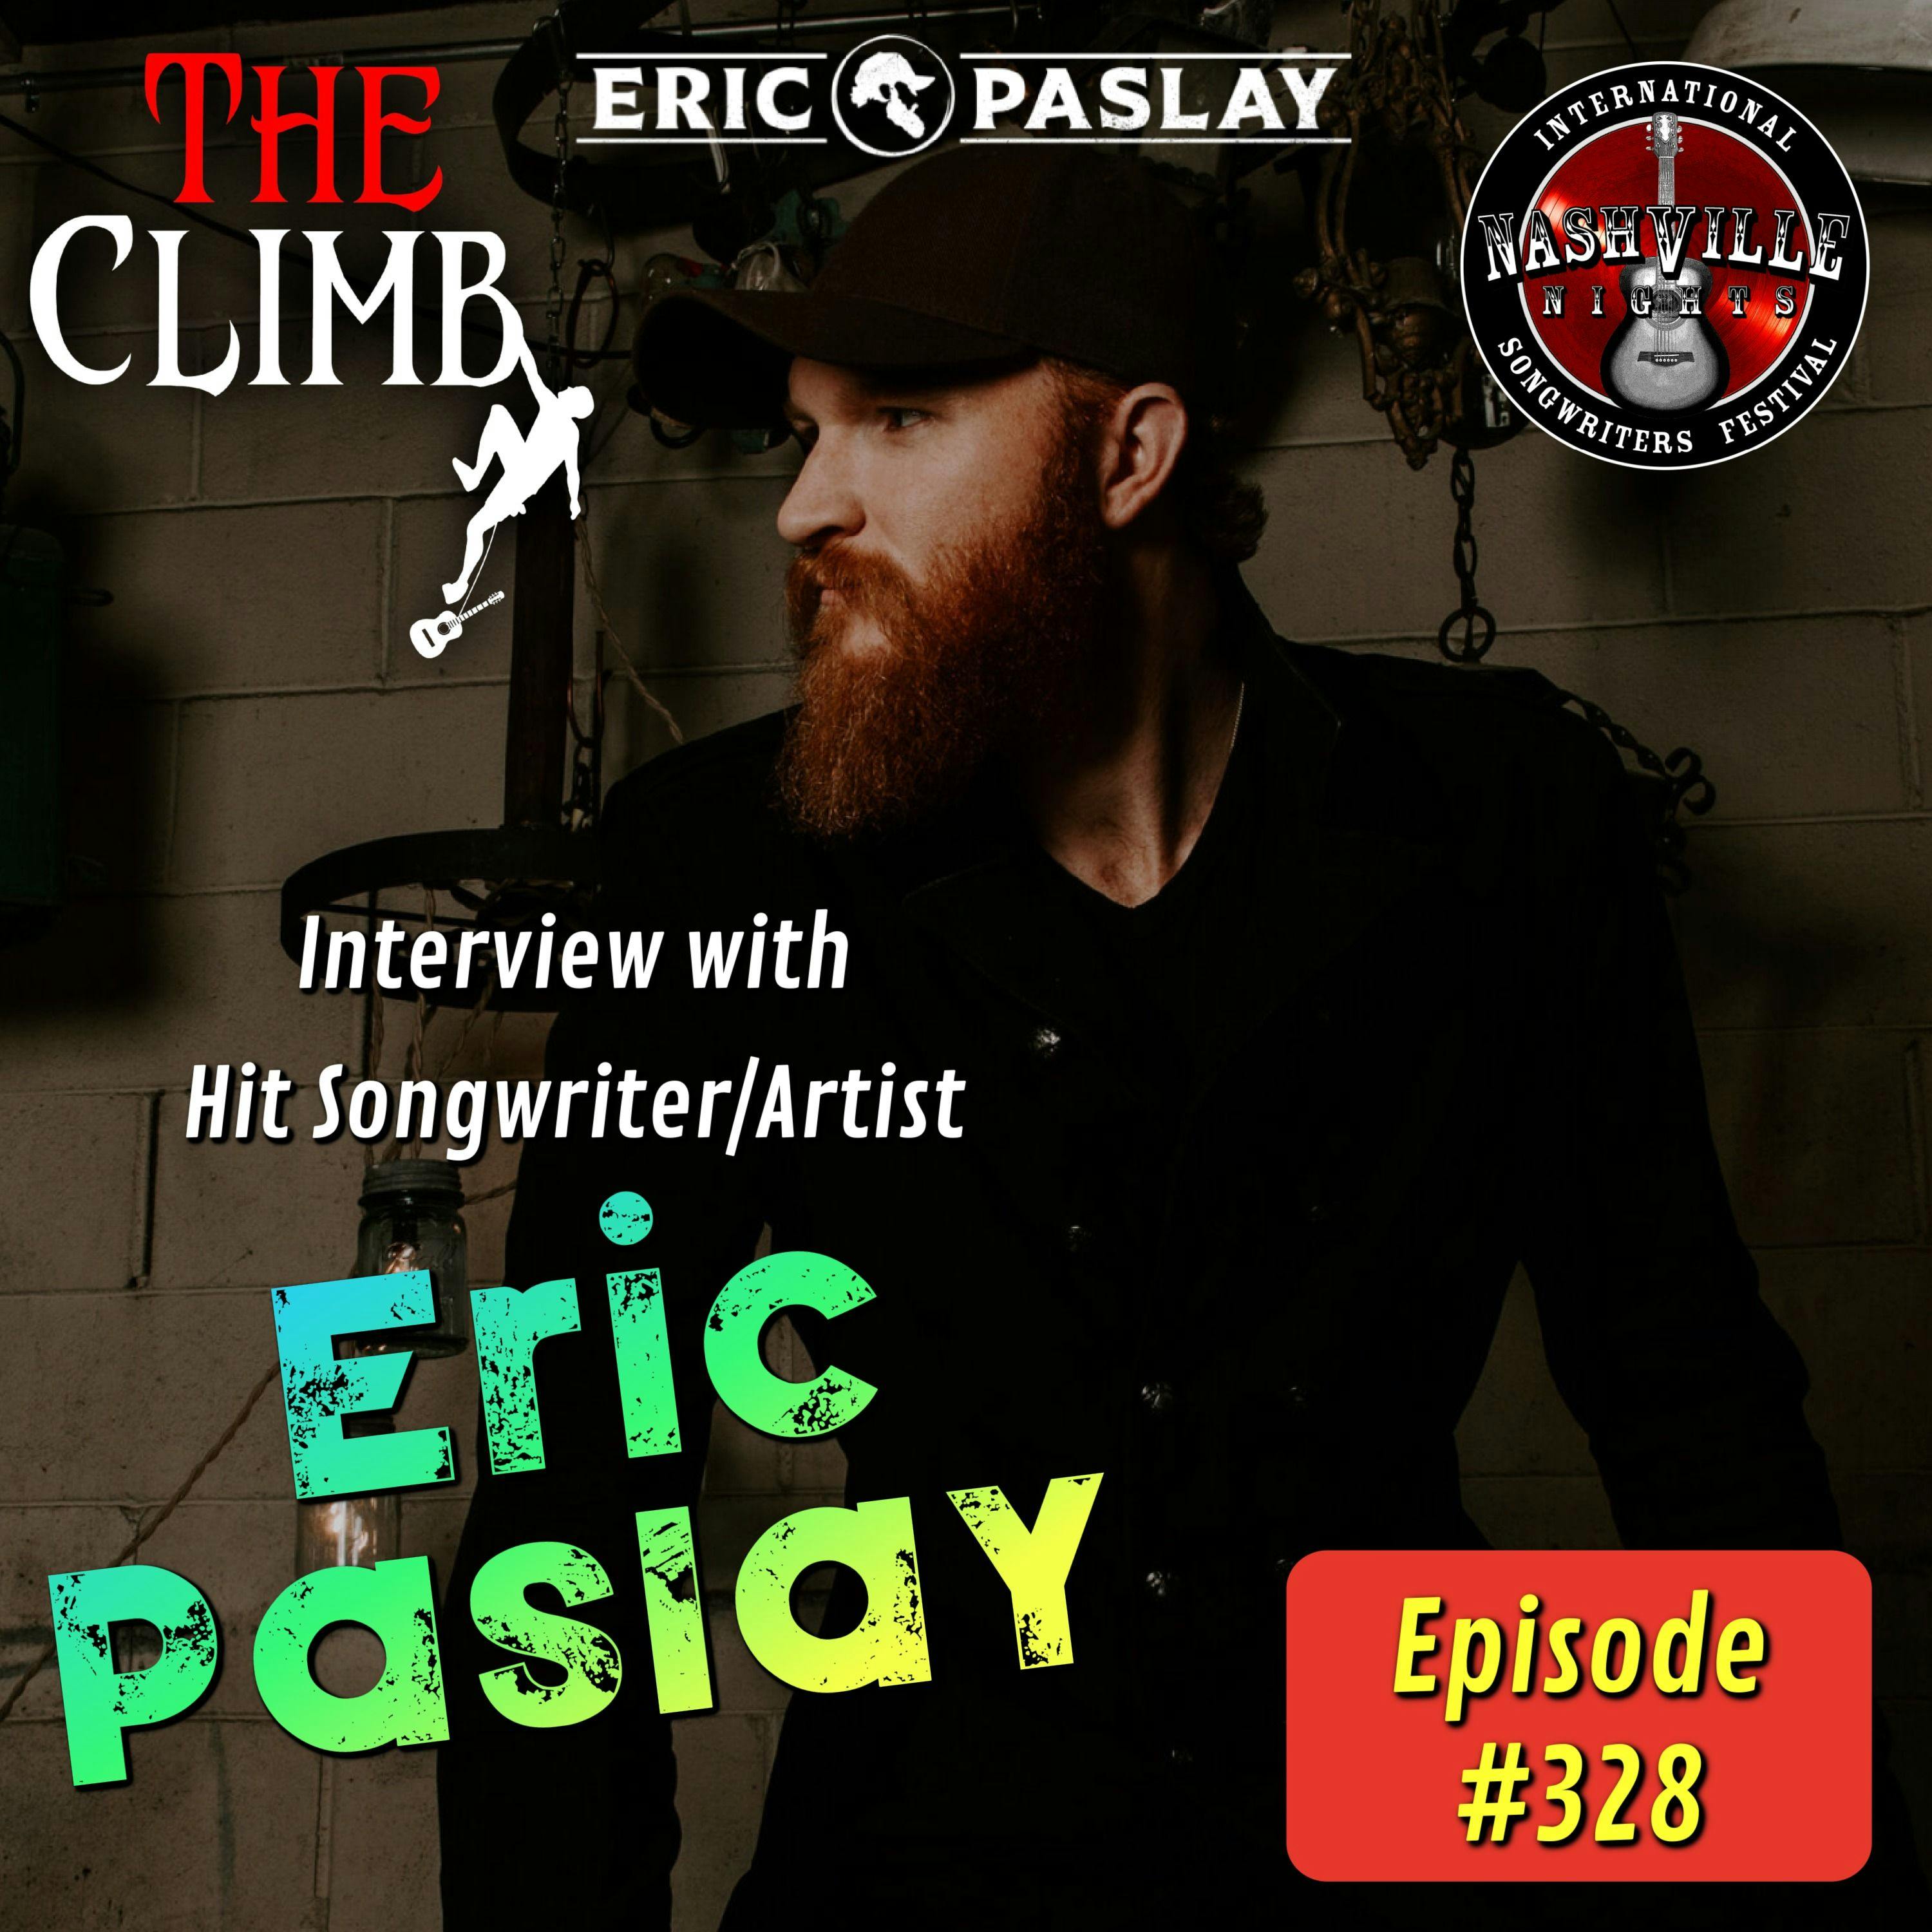 Ep 328: Interview with Hit Songwriter & Artist, Eric Paslay